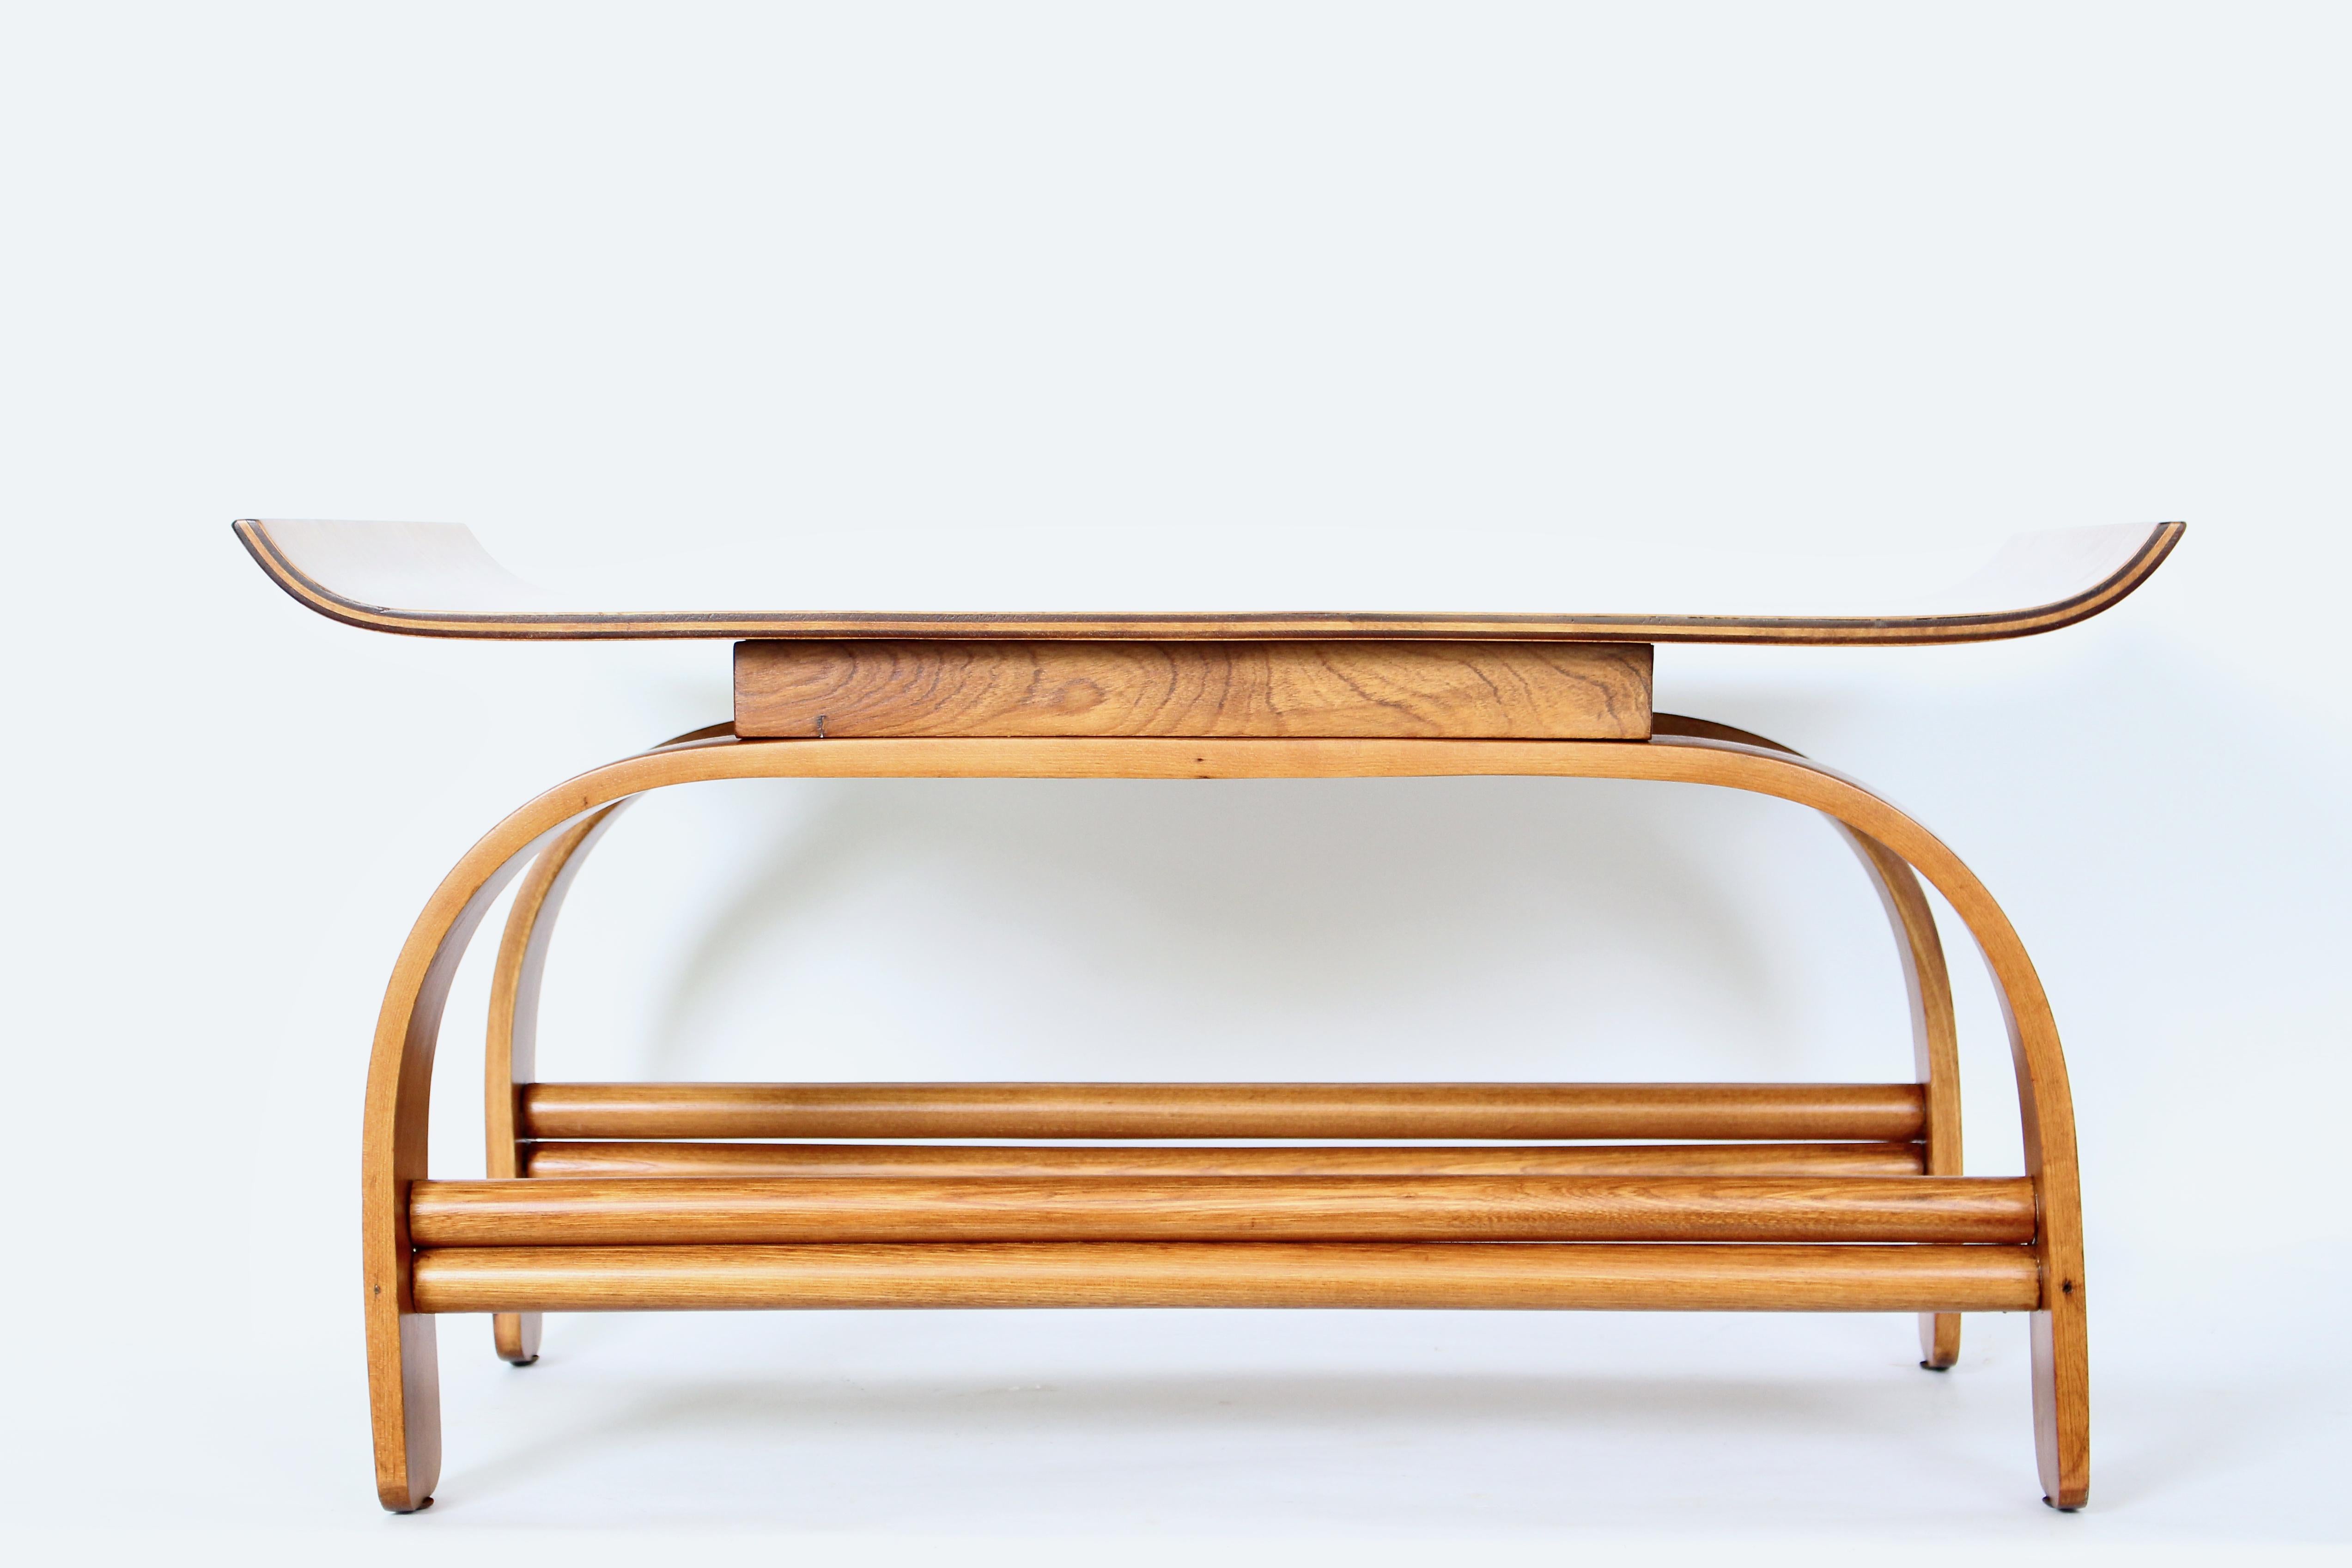 Gilbert Rohde for Heywood Wakefield Steam Bent Maple Coffee Table, C. 1930.  Featuring a floating, laminated steam bent Maple surface, flared upturned ends,  rectangular Maple lift, double tier dowels, a top balanced double doweled reinforced steam